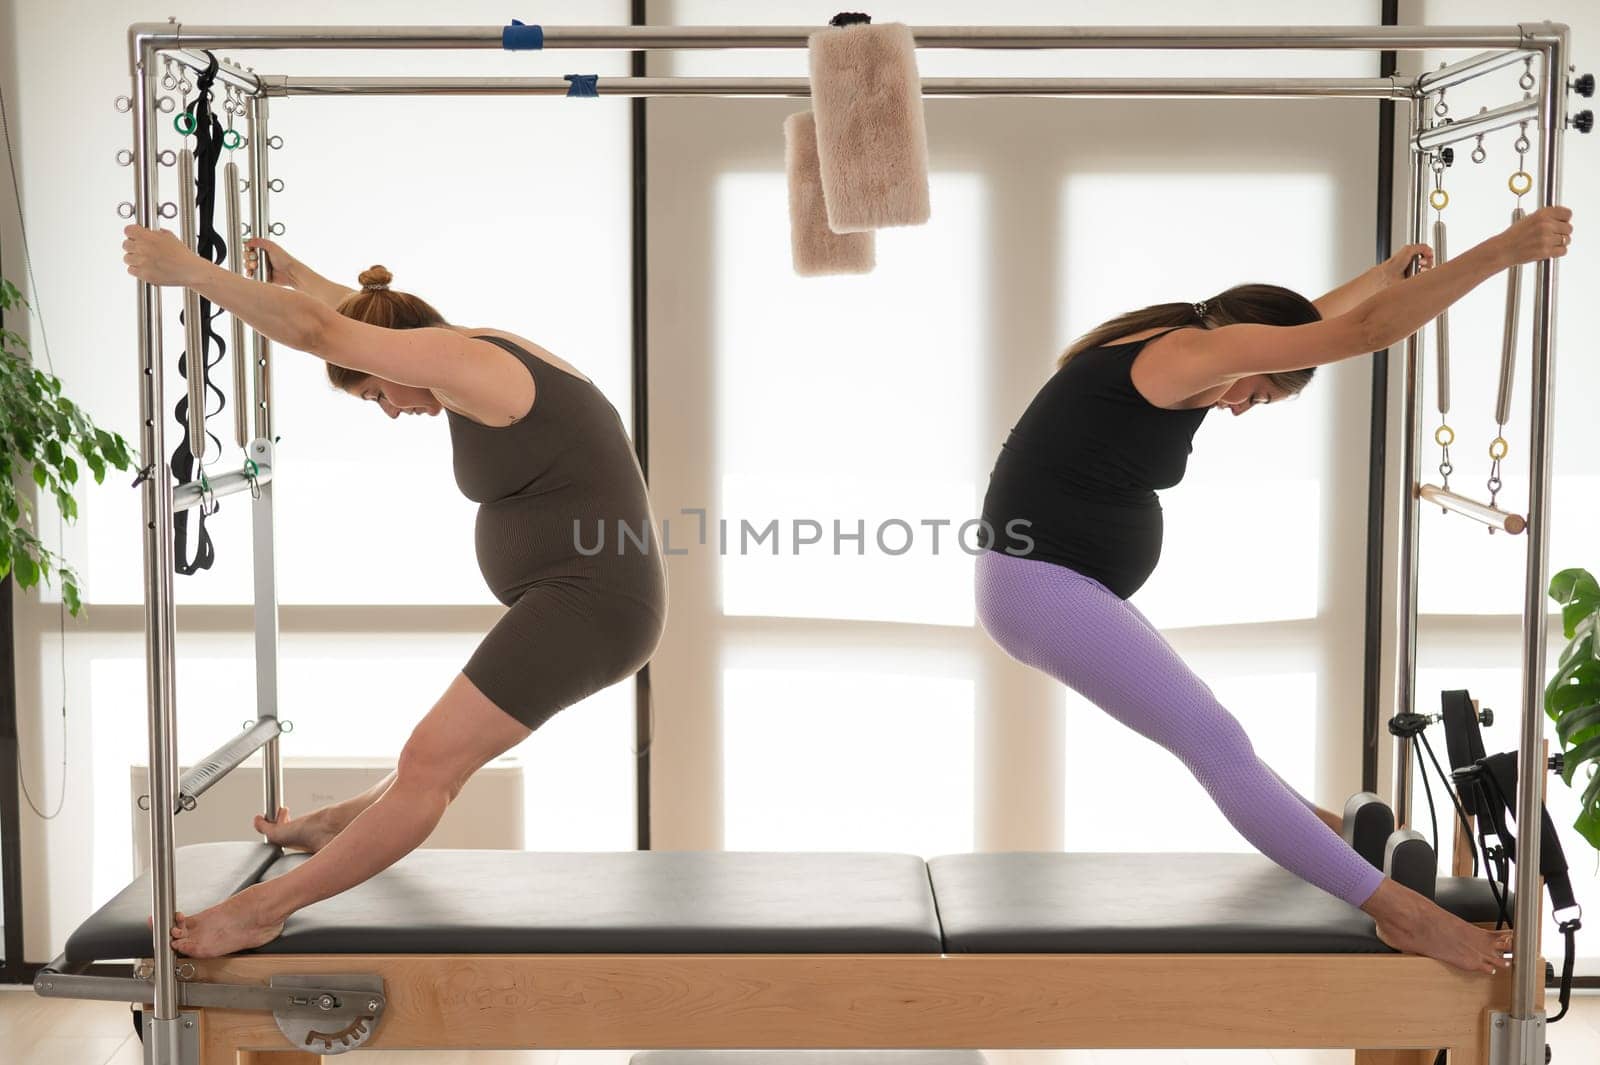 Two pregnant women are doing Pilates on a Cadillac reformer